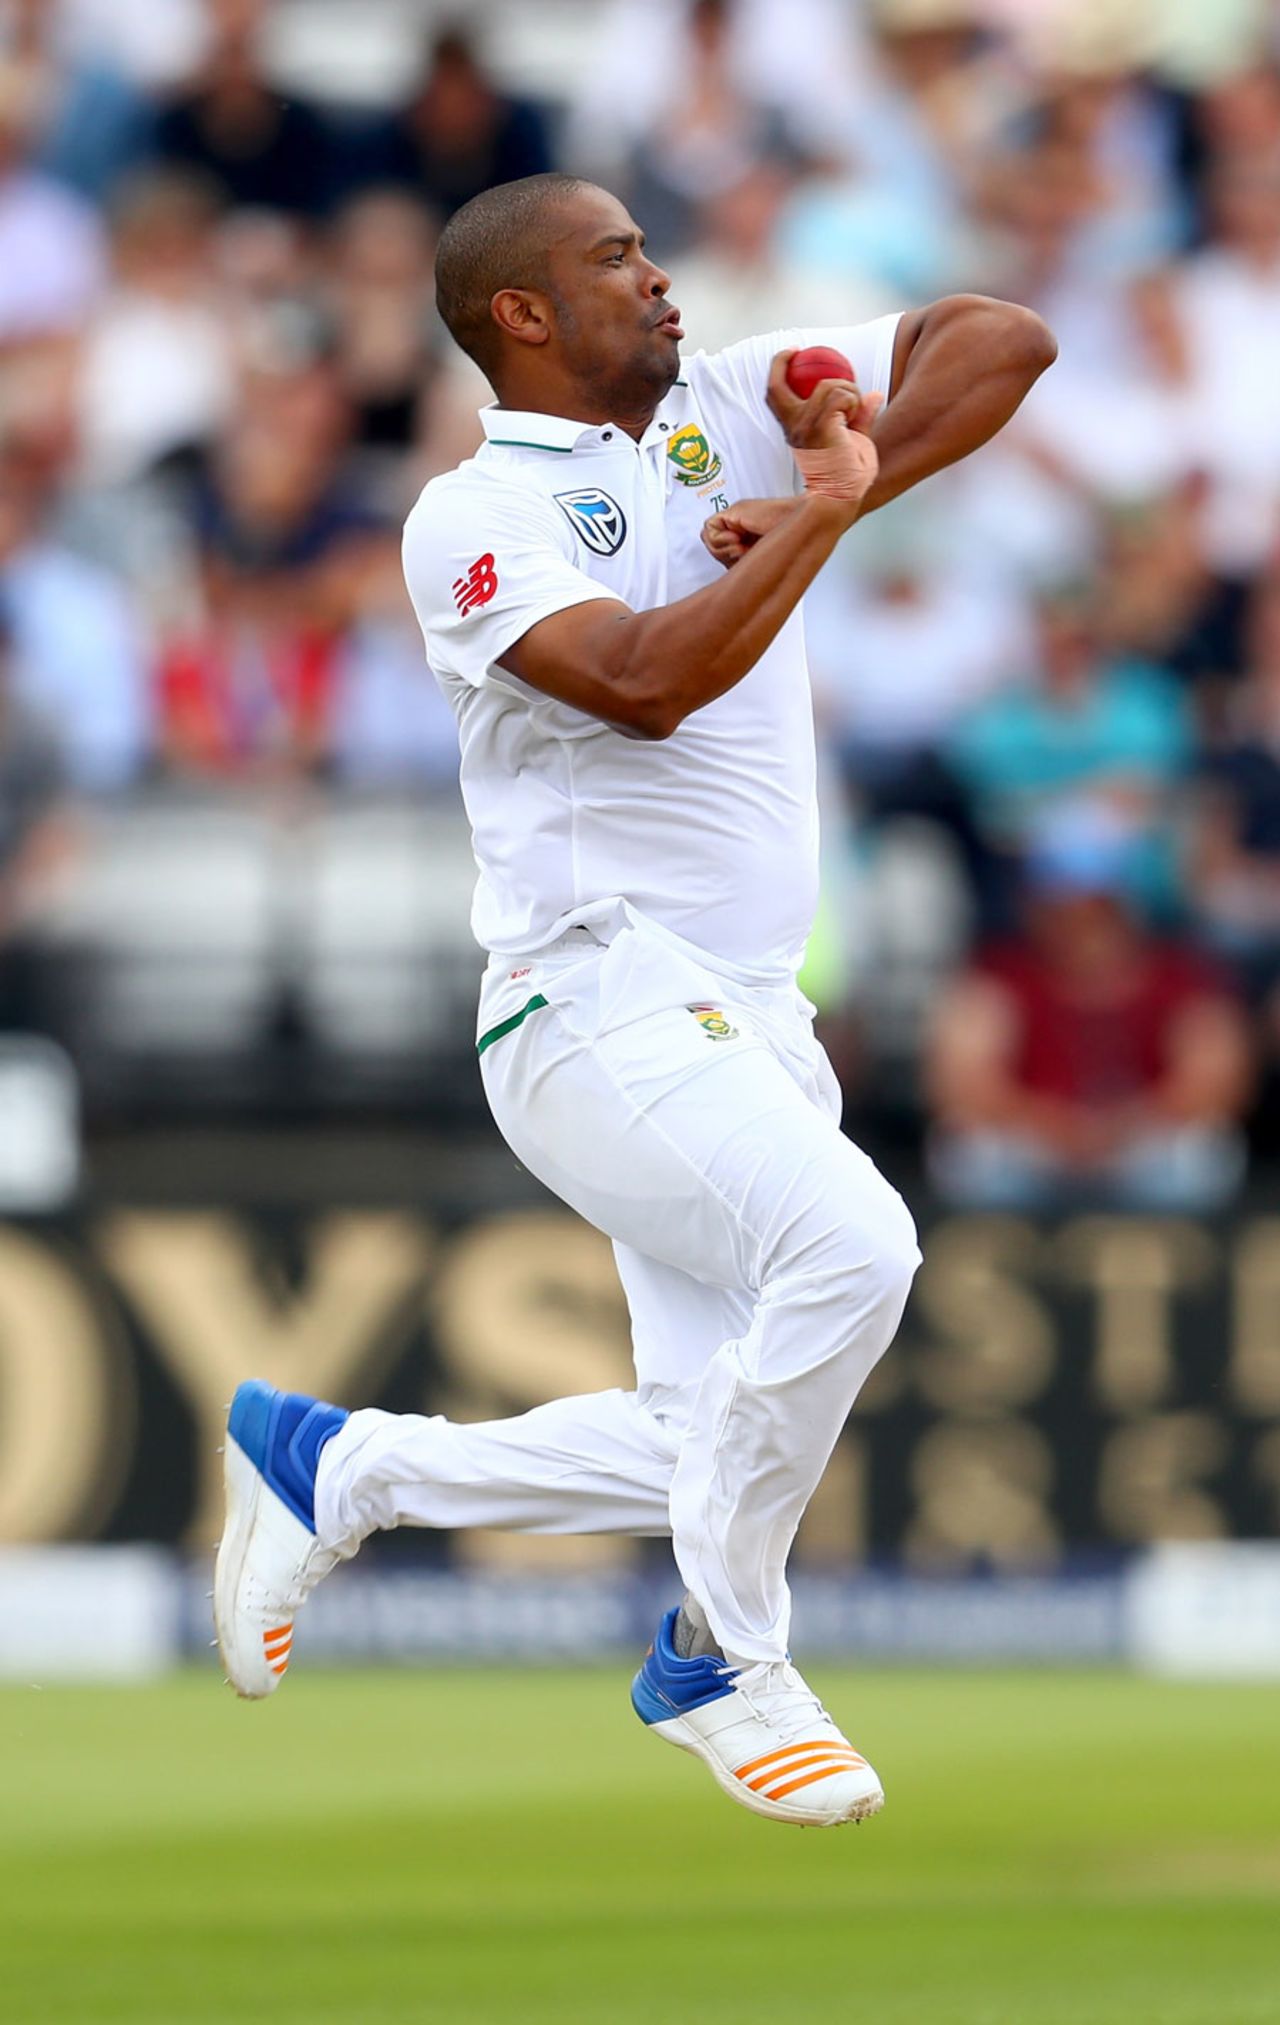 Vernon Philander in his pre-delivery leap, England v South Africa, 1st Investec Test, Lord's, 4th day, July 9, 2017